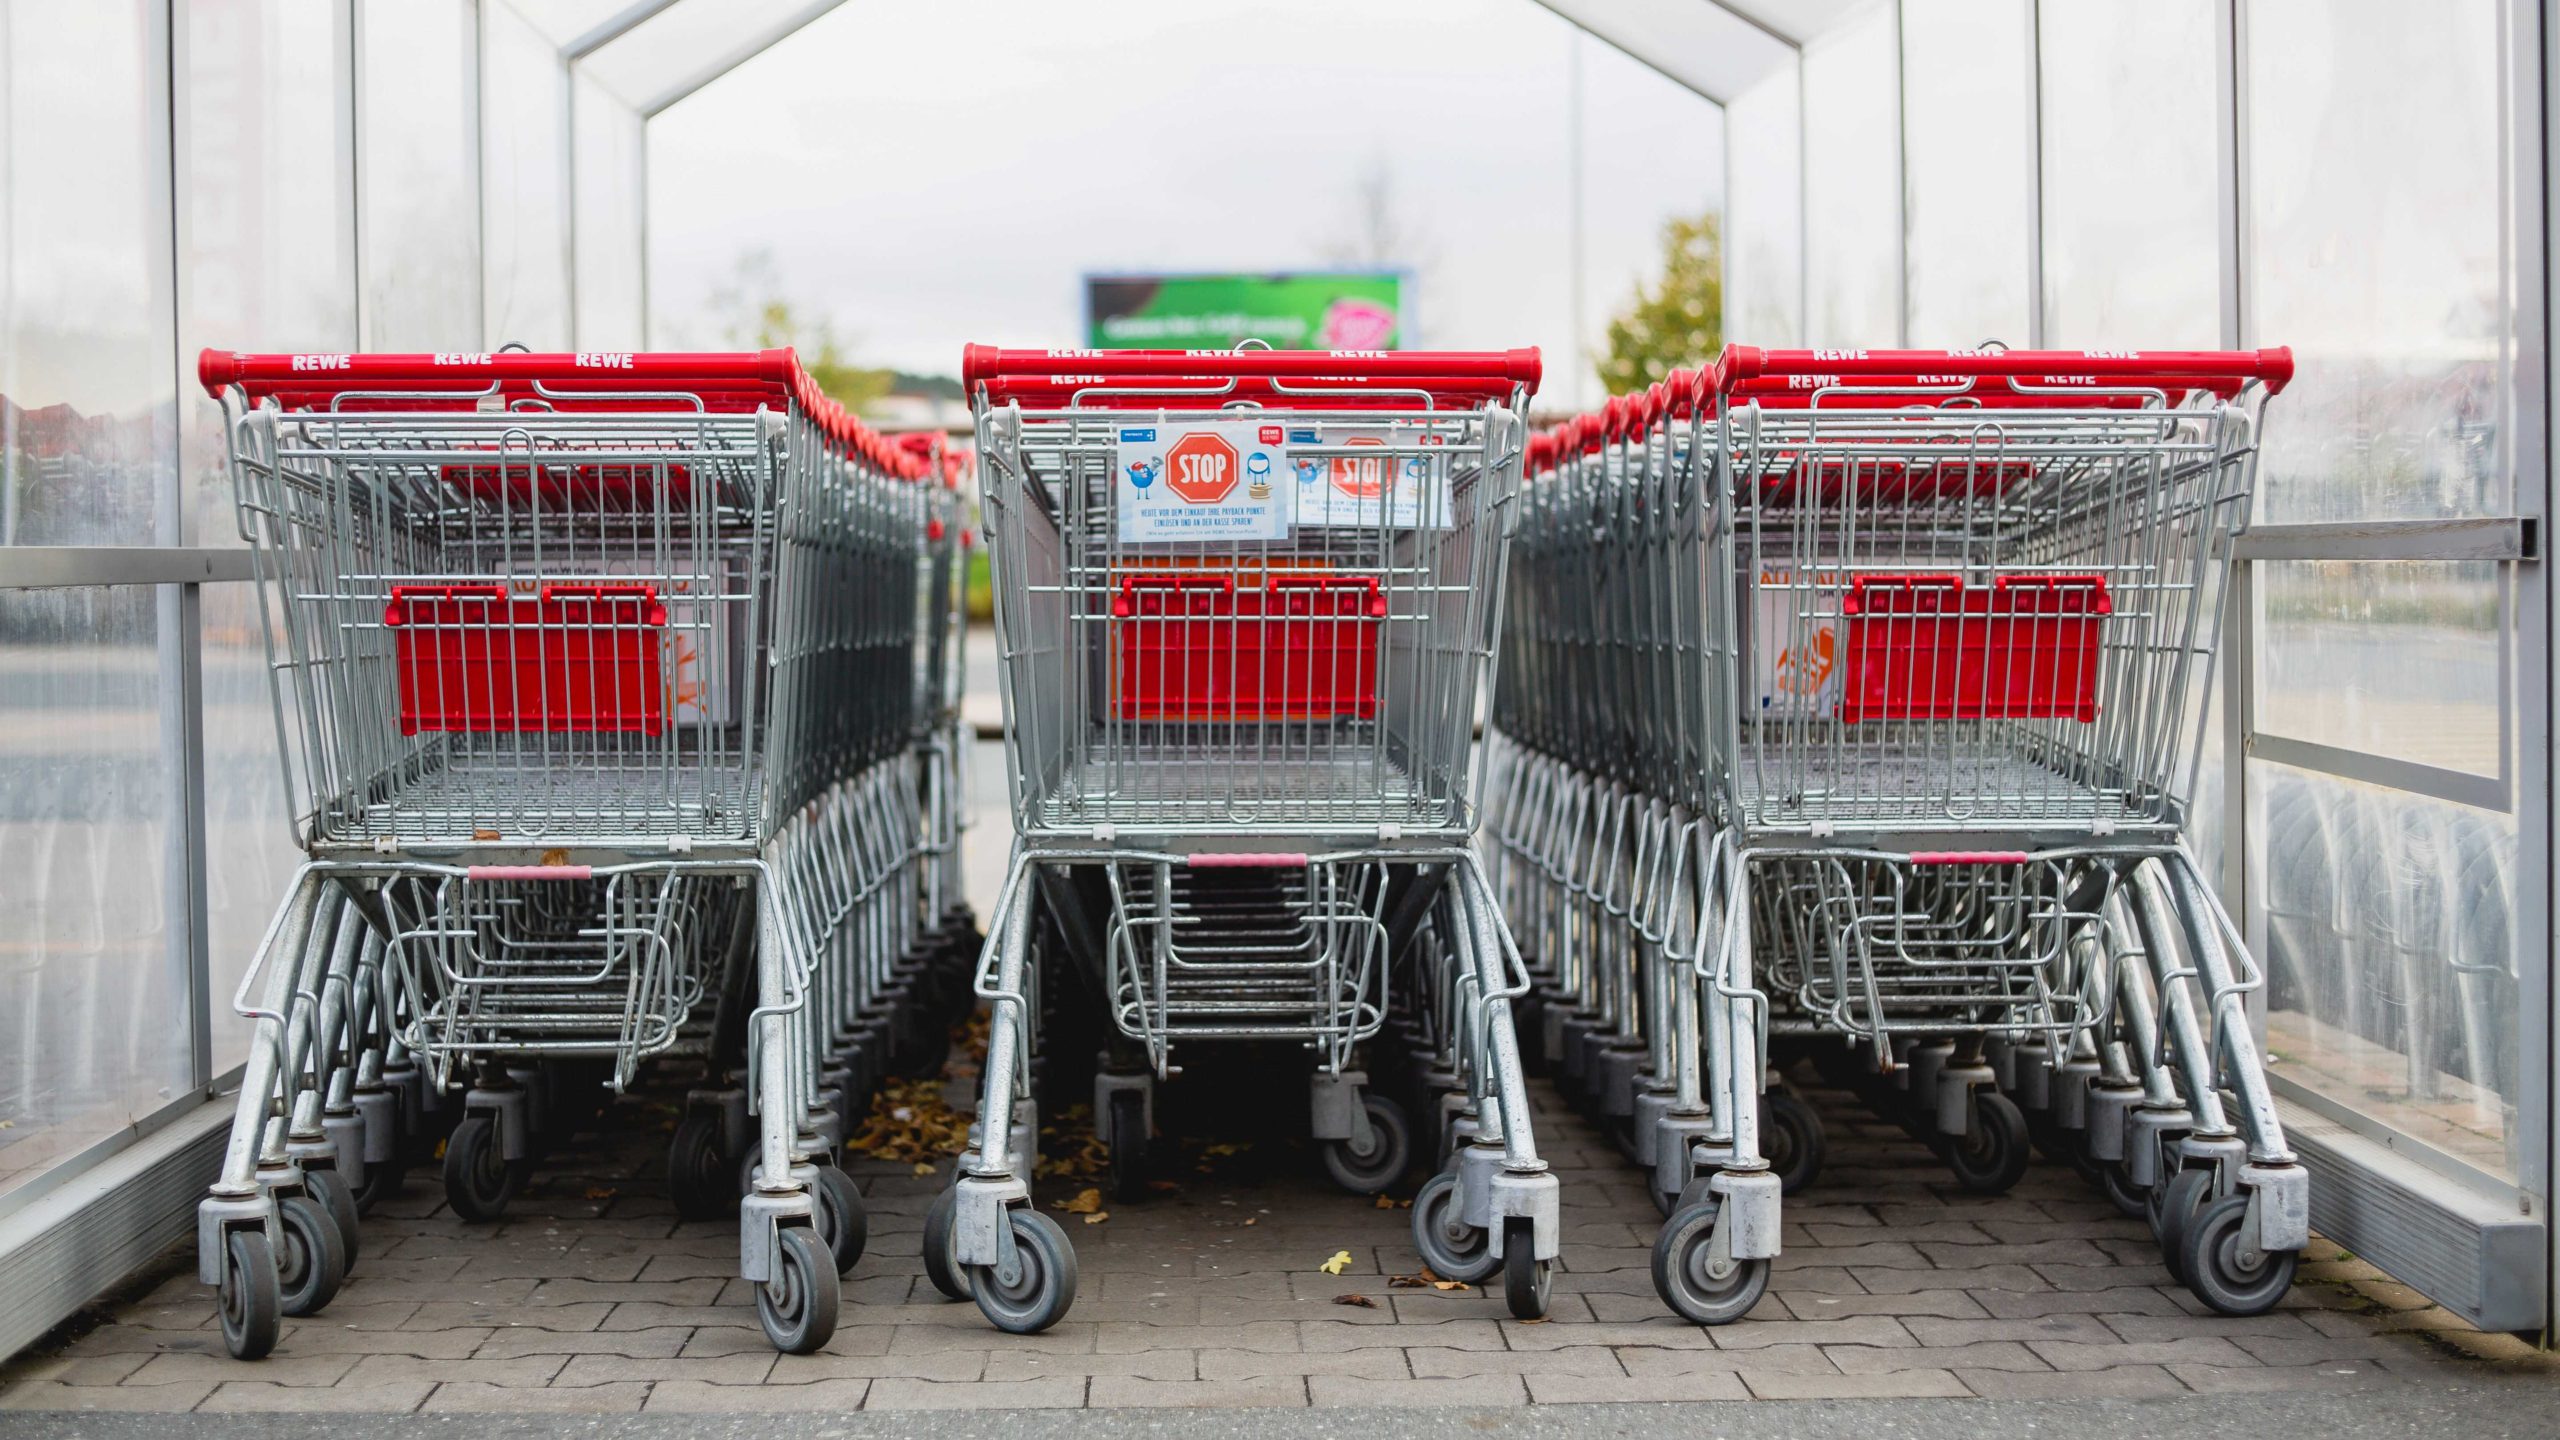 Image of Shopping Trolleys Stacked Together